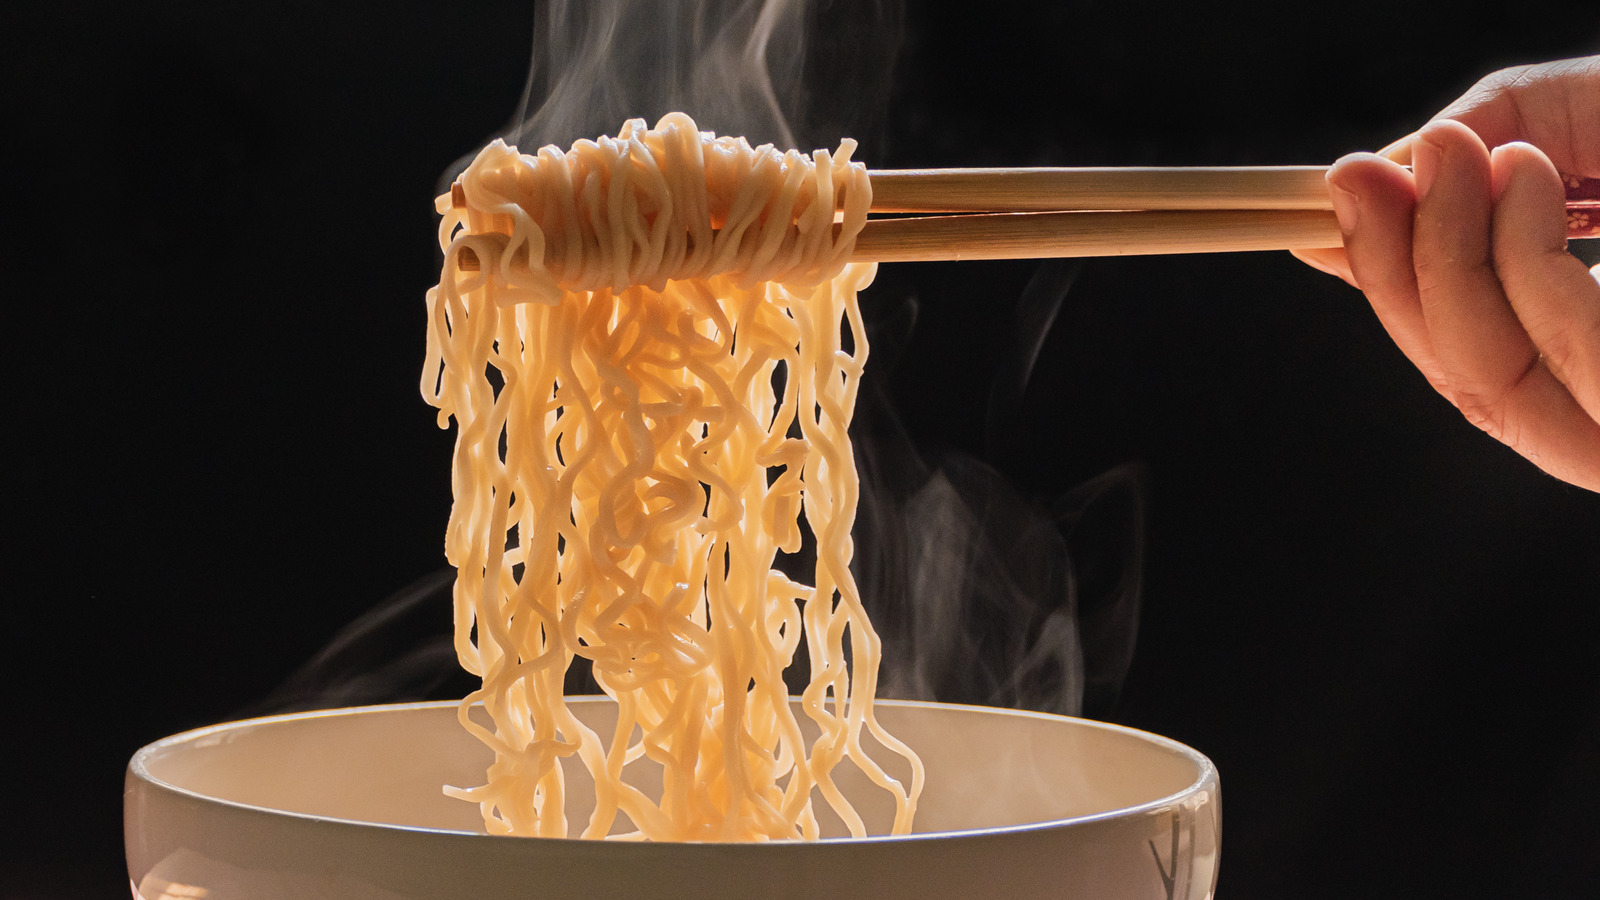 How To Cook Ramen Noodles With Just Hot Water 